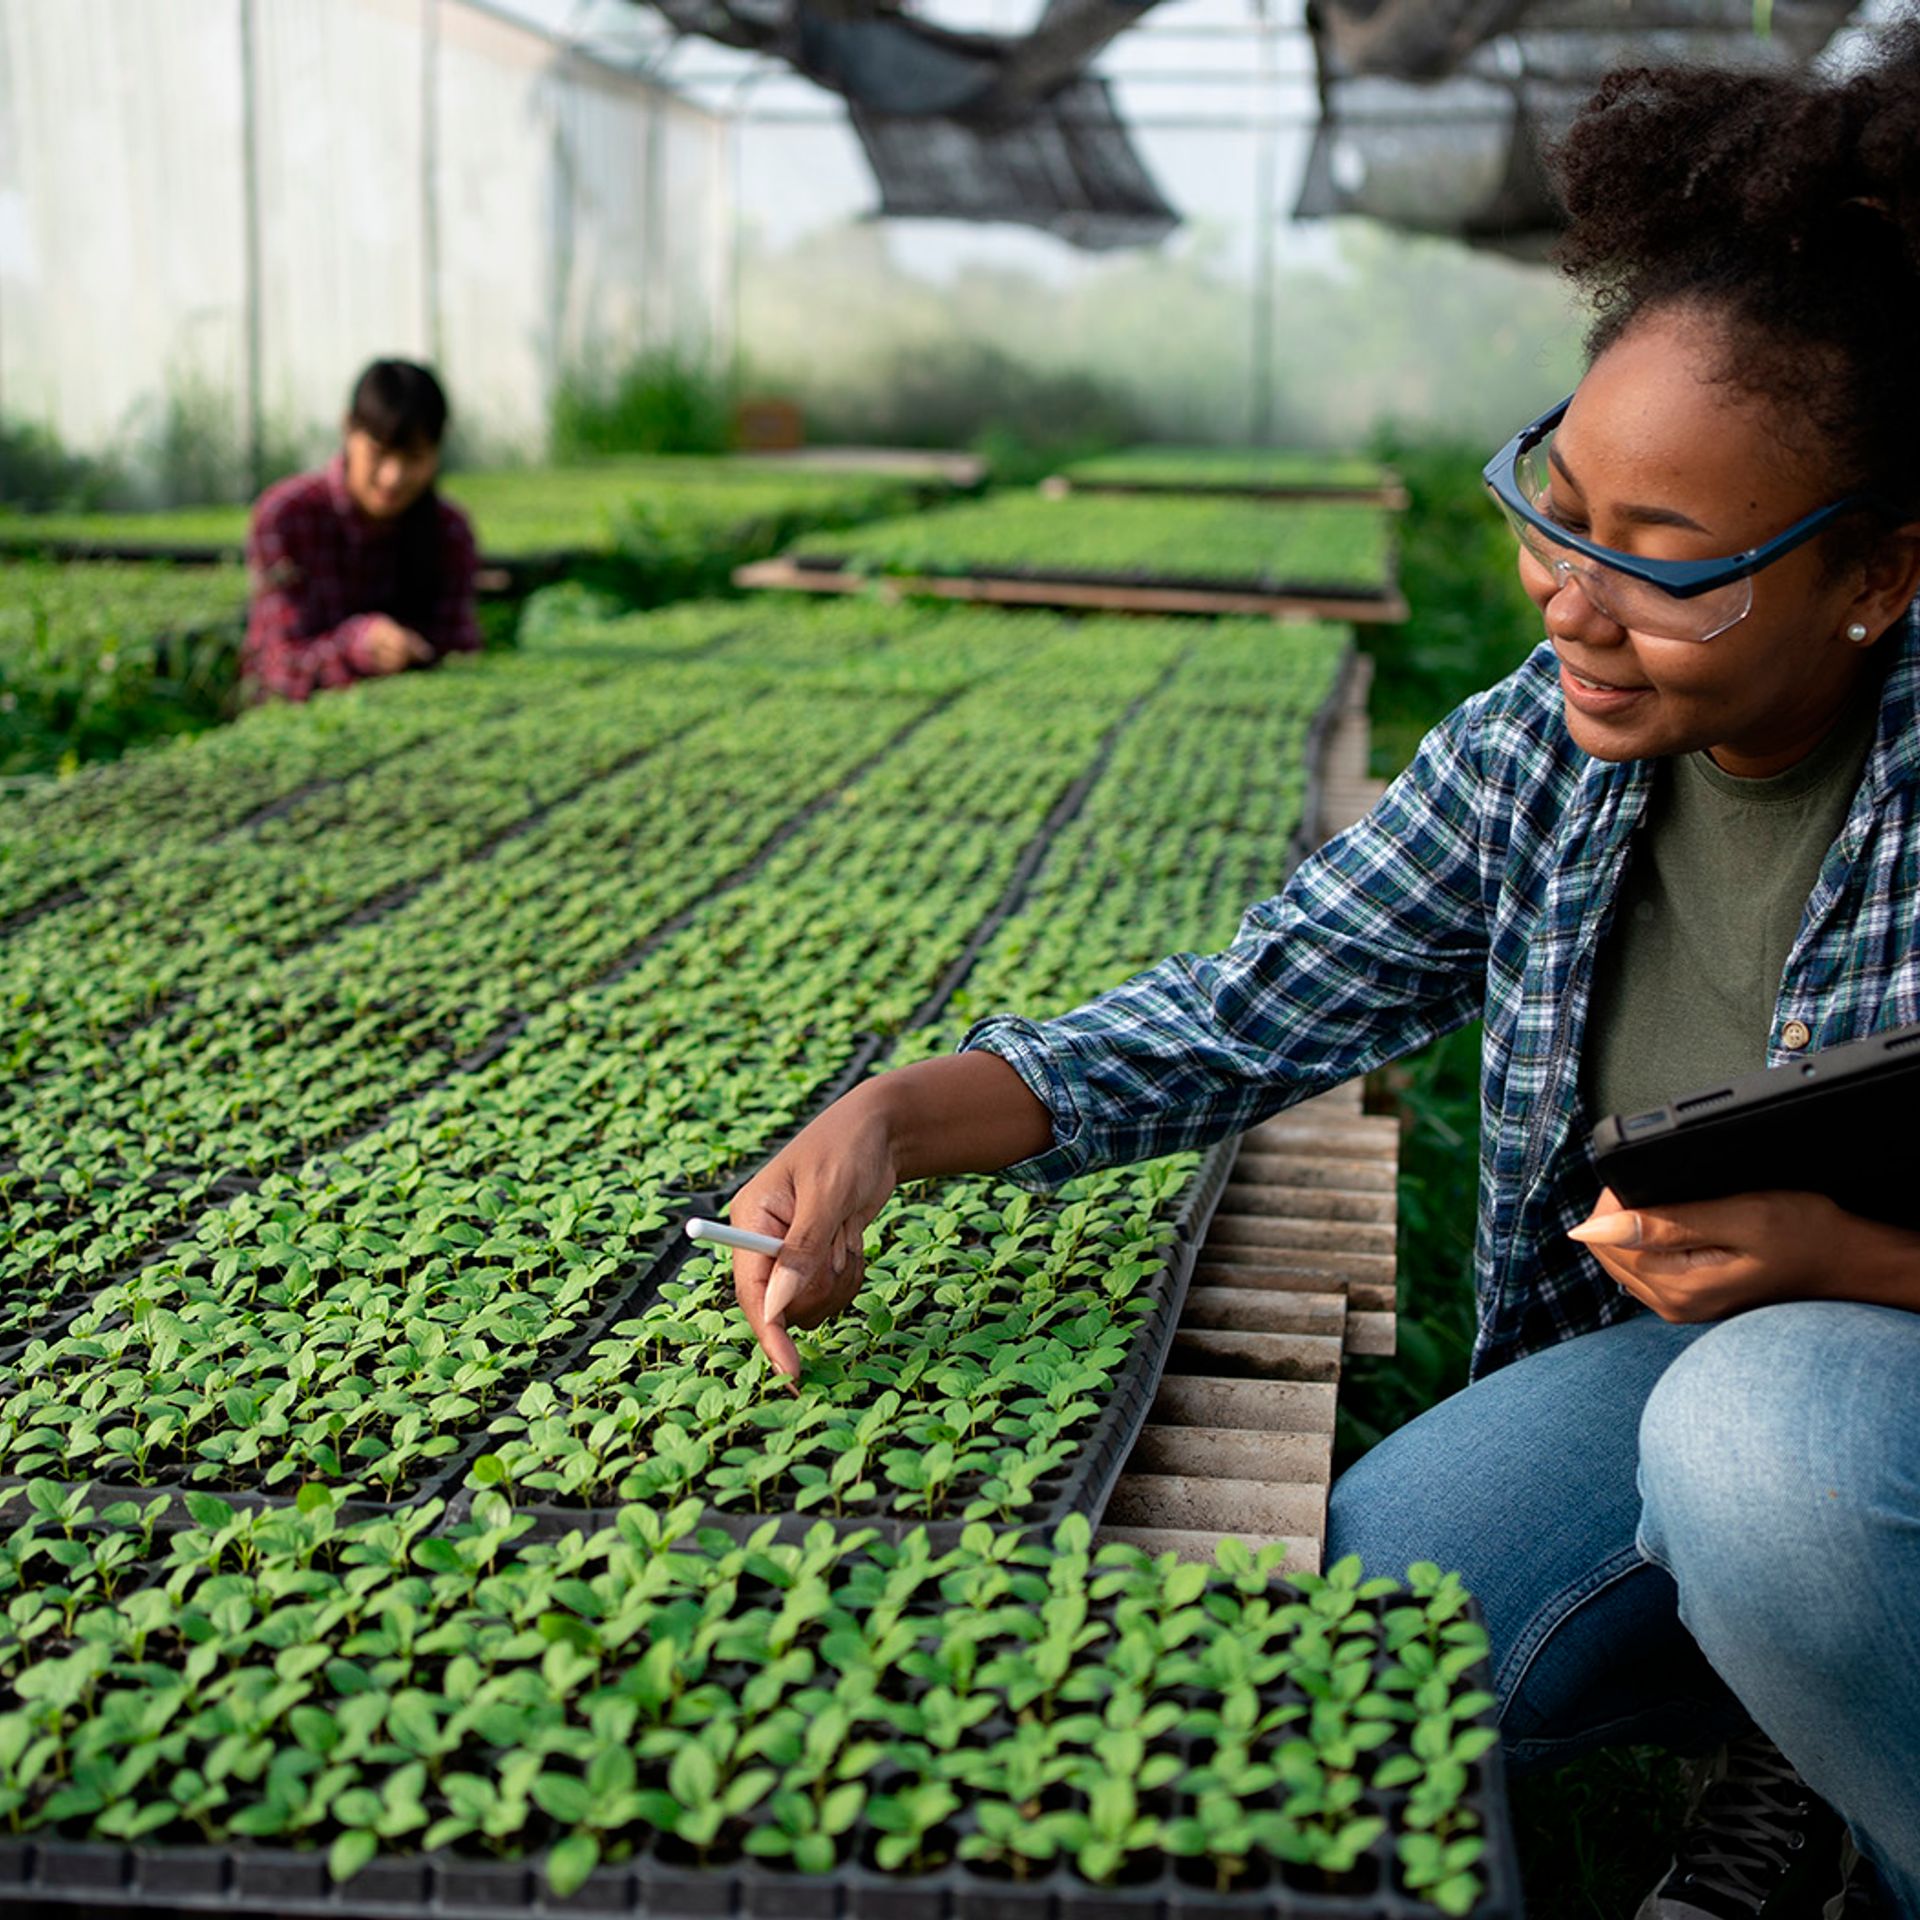 Image of a certification body auditor inspecting a plant nursery